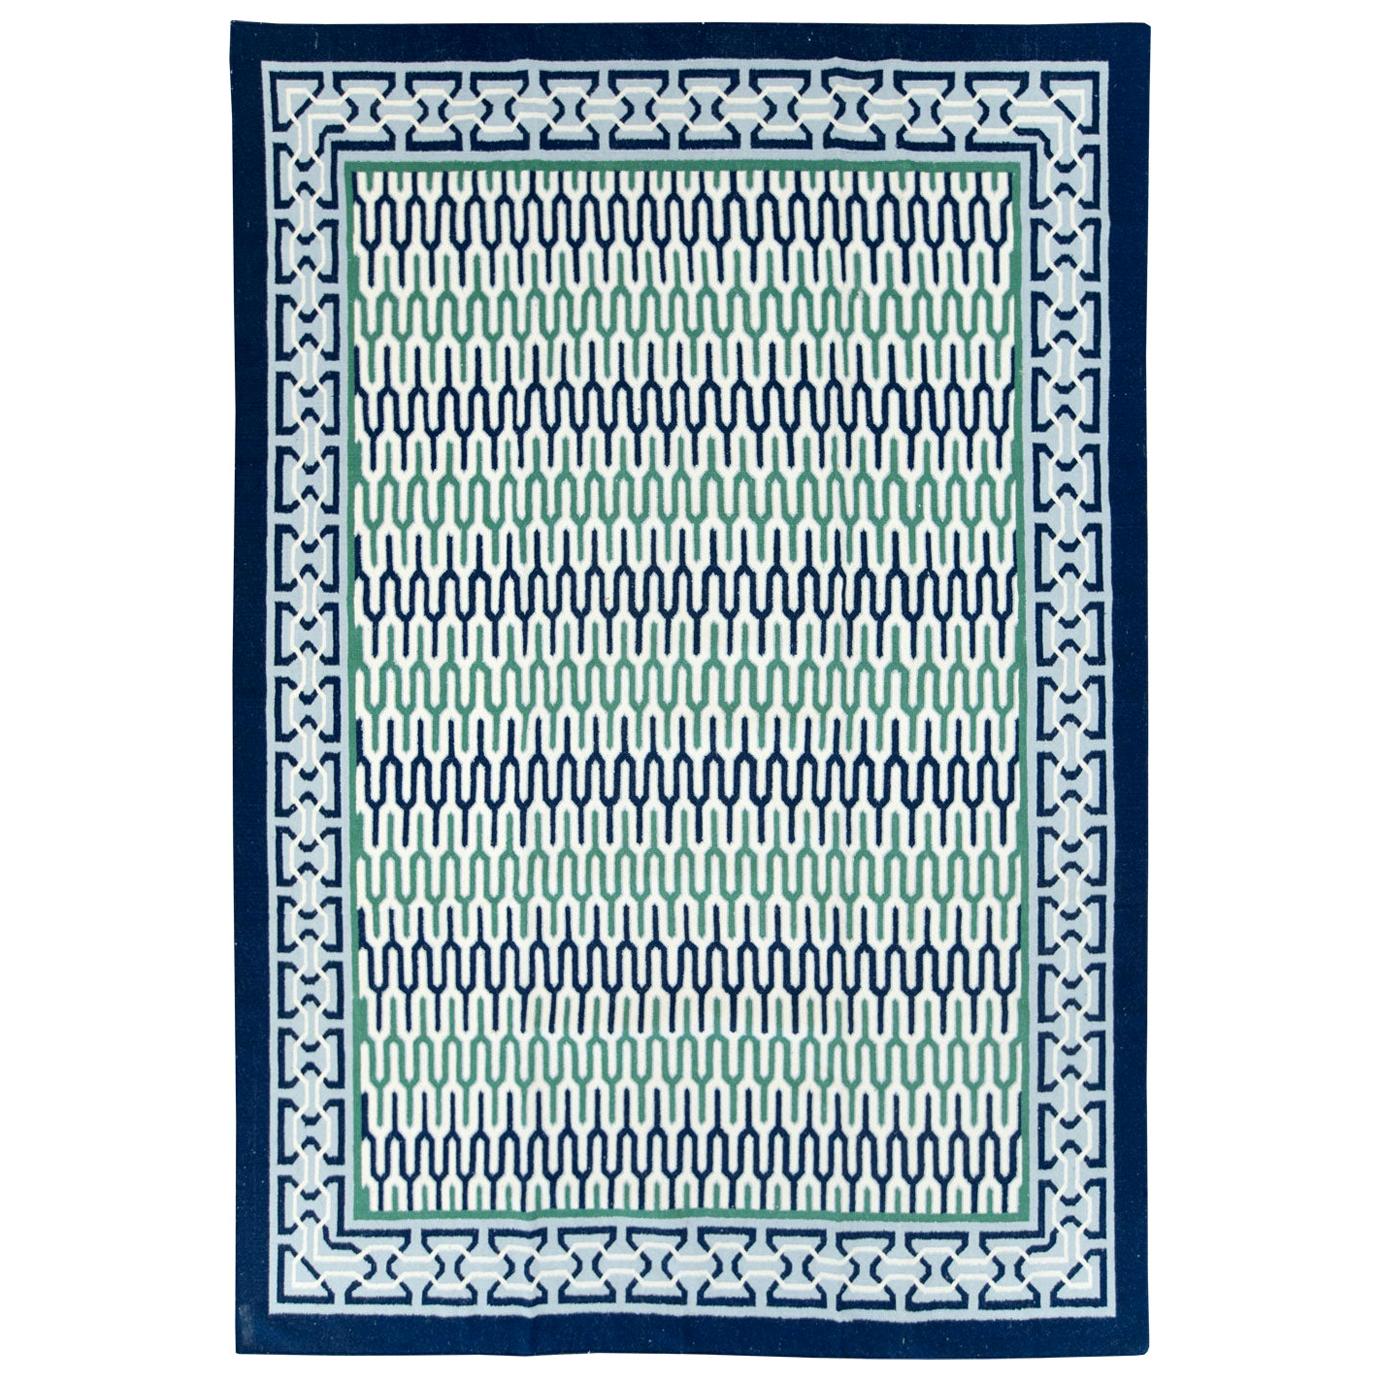 Contemporary Handmade Indian Dhurrie Room Size Carpet in Blue and Green